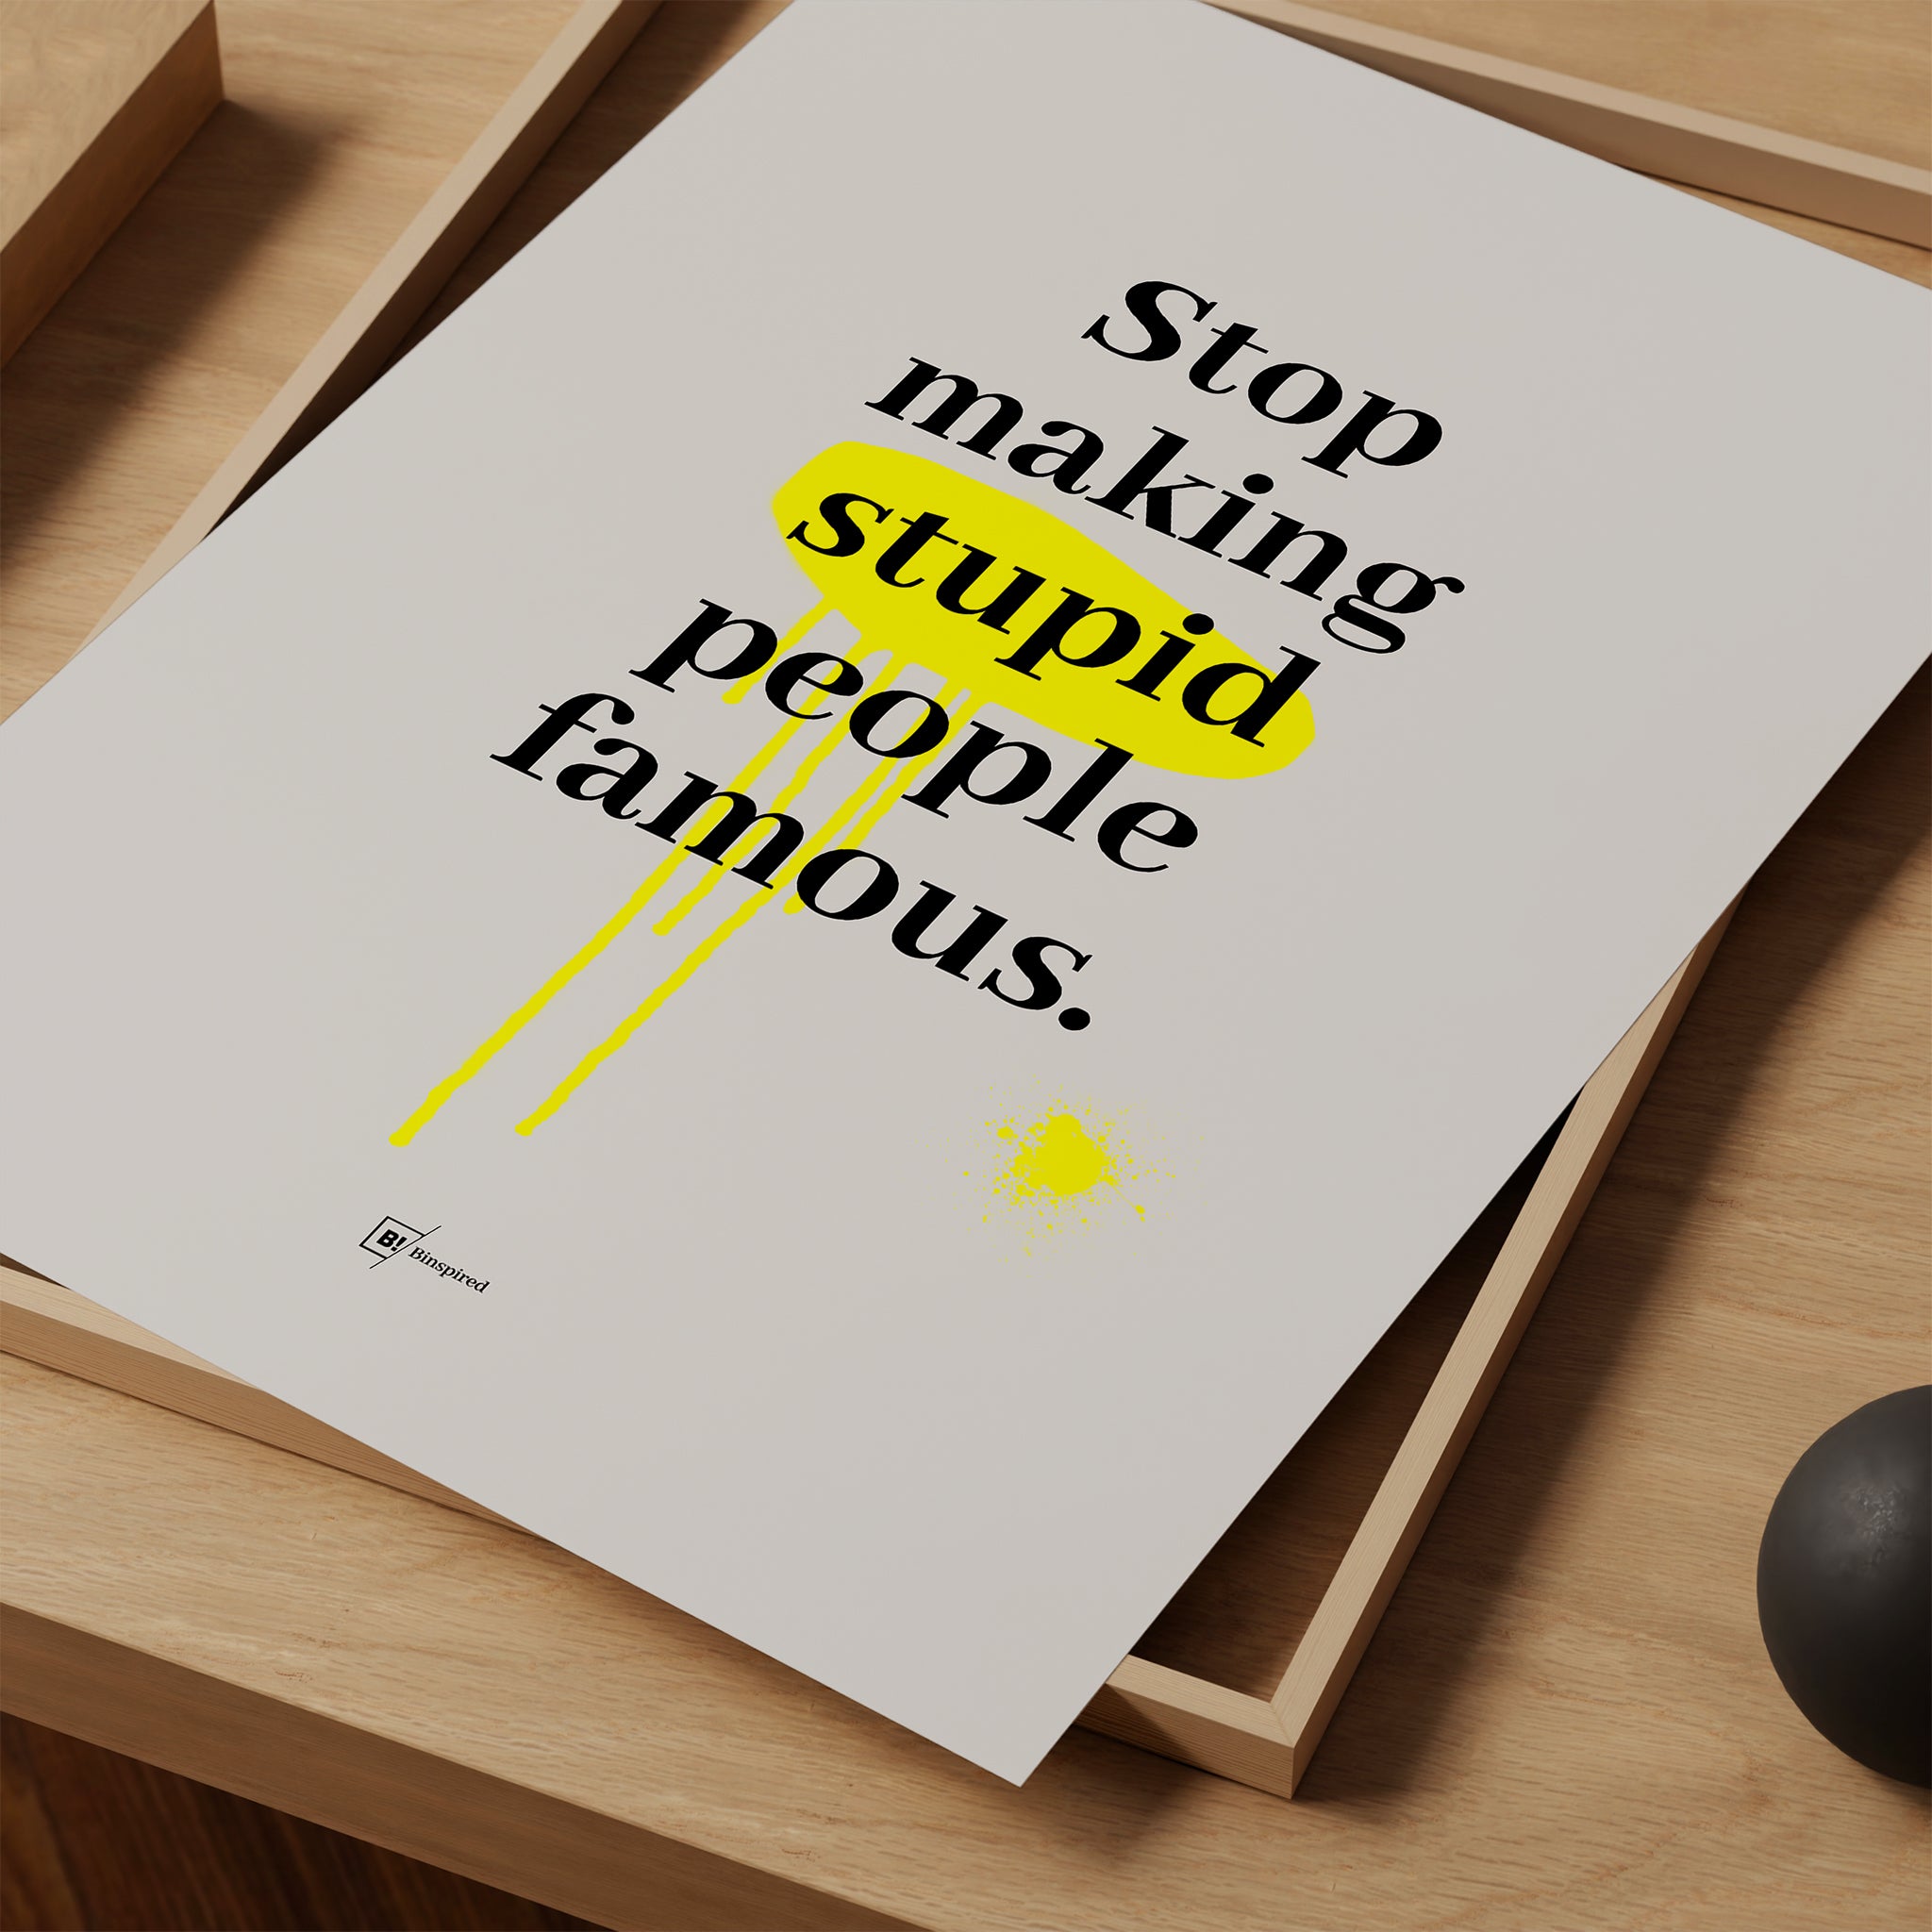 Be inspired by our "Stop making stupid people famous" quote art print! This artwork was printed using giclée on archival acid-free paper and is presented as a print close-up that captures its timeless beauty in every detail.